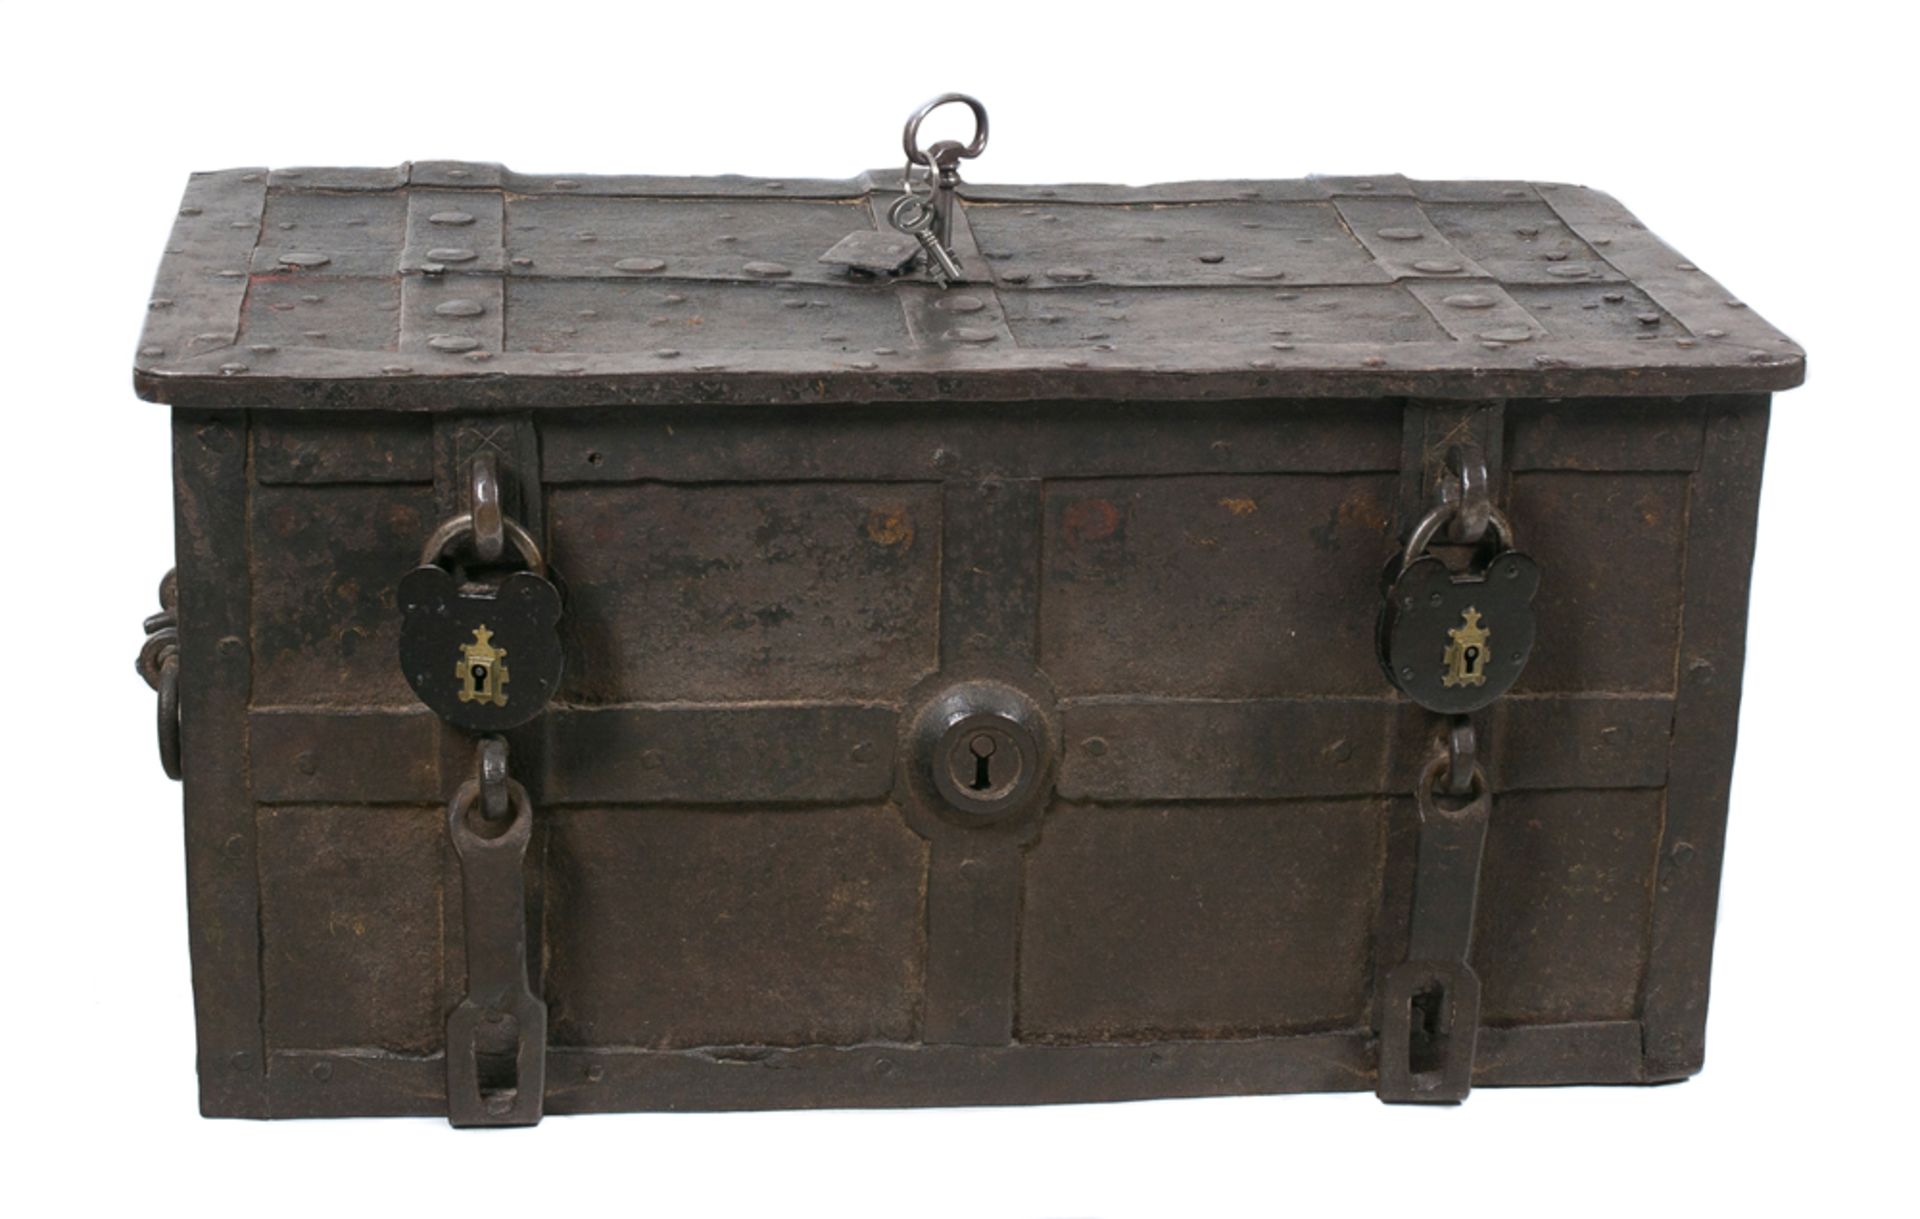 Wrought iron strong box. Nuremberg or Augsburg. Late 16th century.